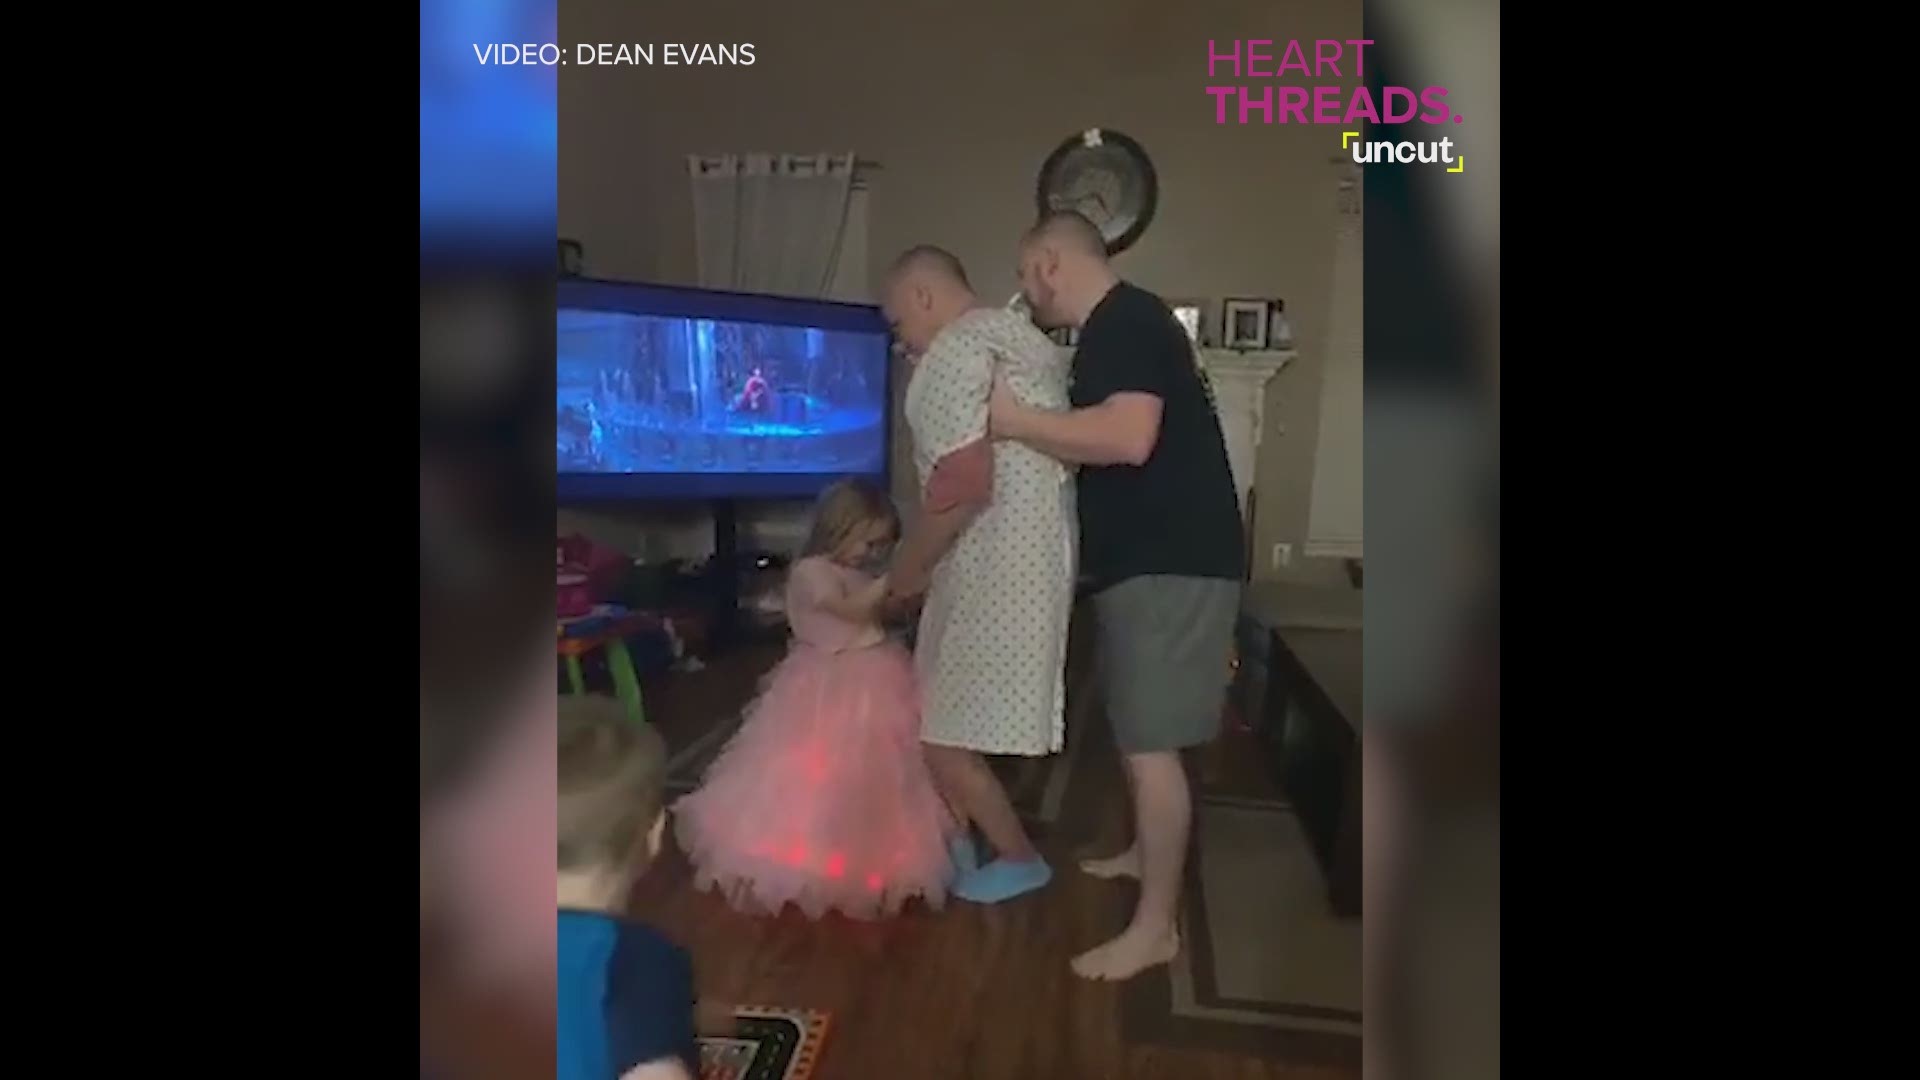 A girl and her grandfather with Alzheimer's shared a heartwarming dance together. Video courtesy of Dean Evans.